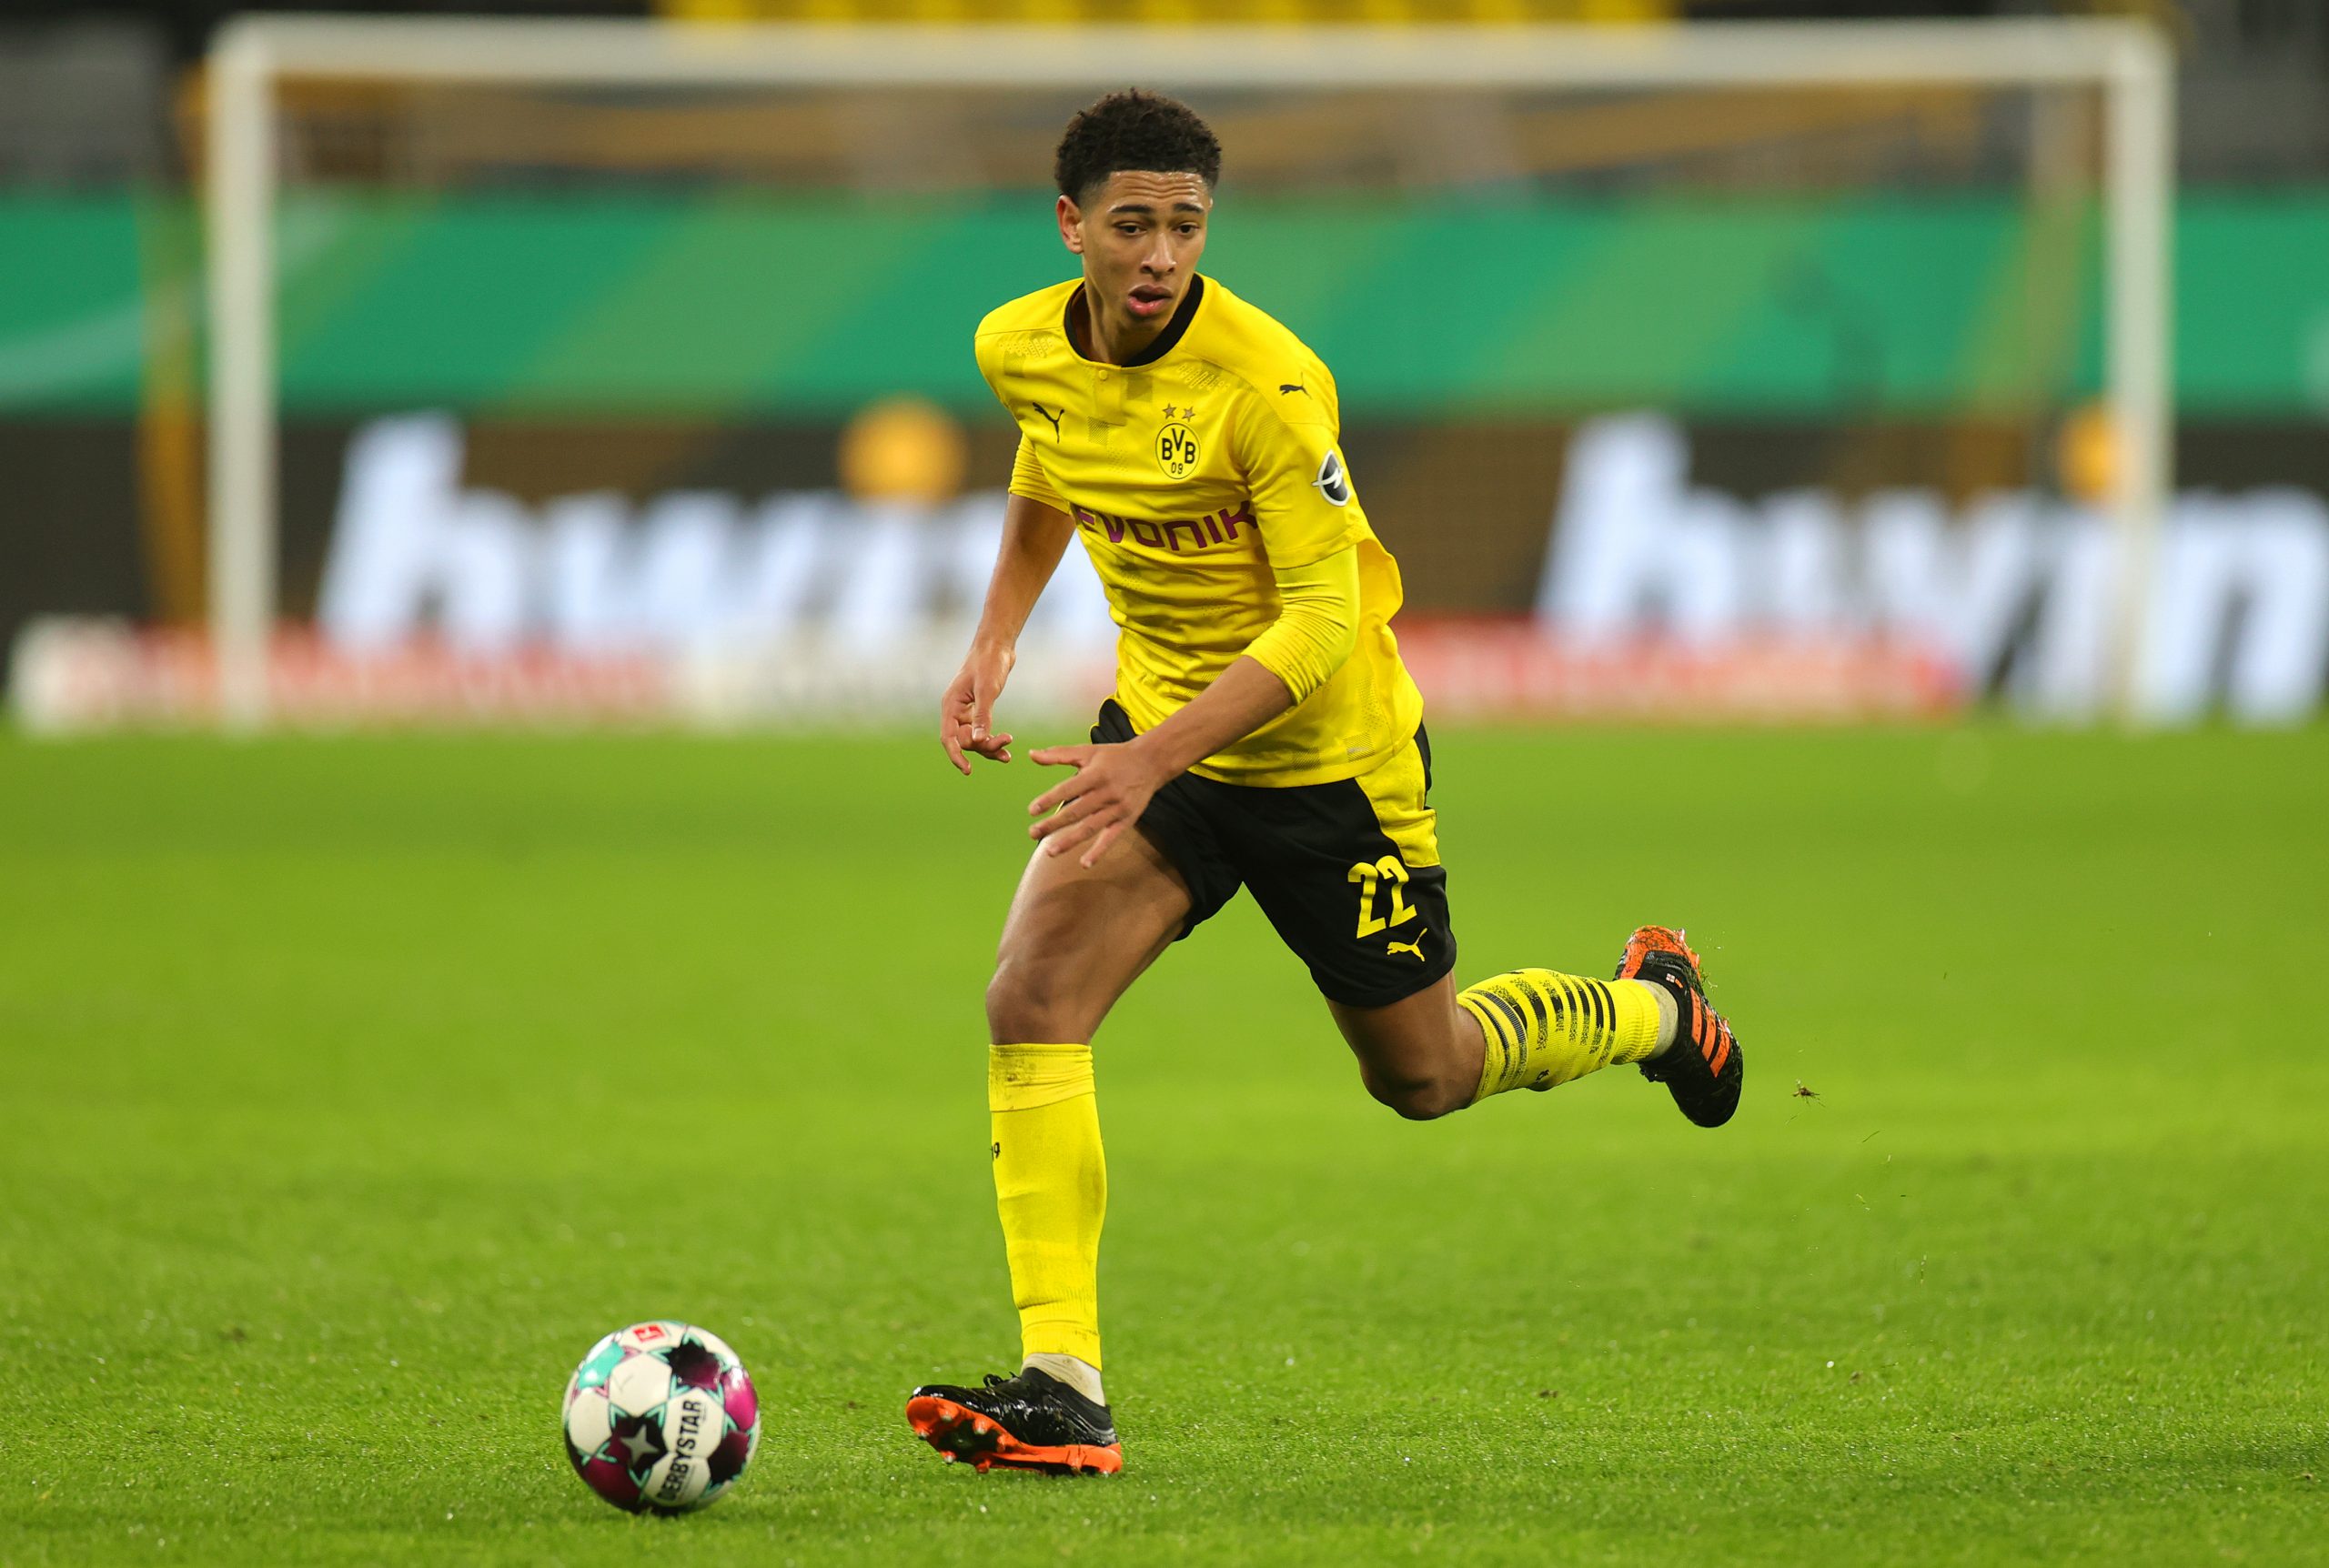 Jude Bellingham in action for Borussia Dortmund. (GETTY Images)